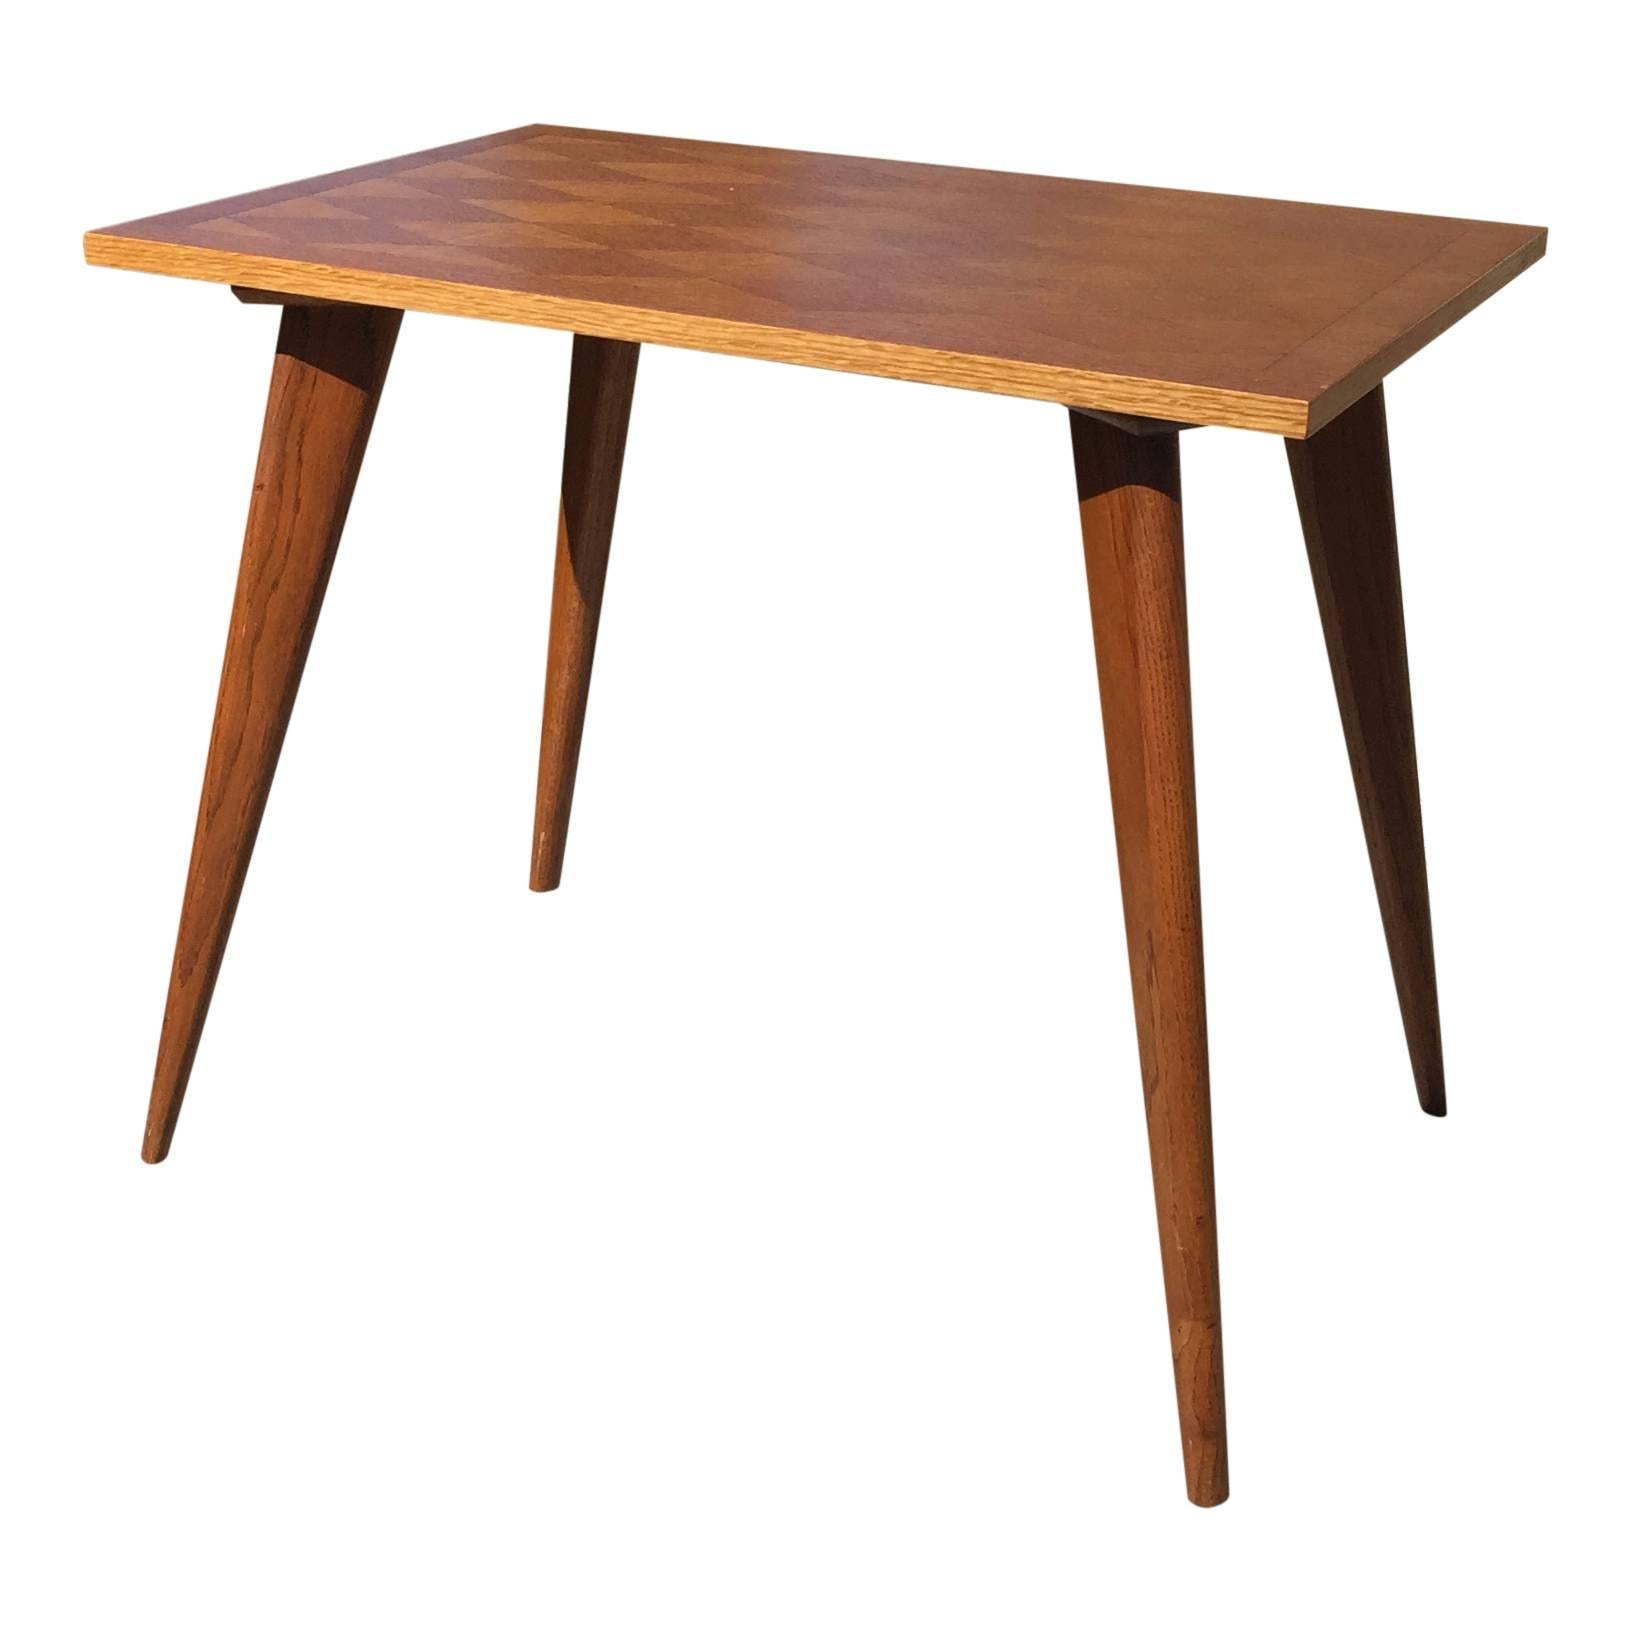 French Elegant Minimalist Petite Solid Oak Marquetry Table, France, 1950s